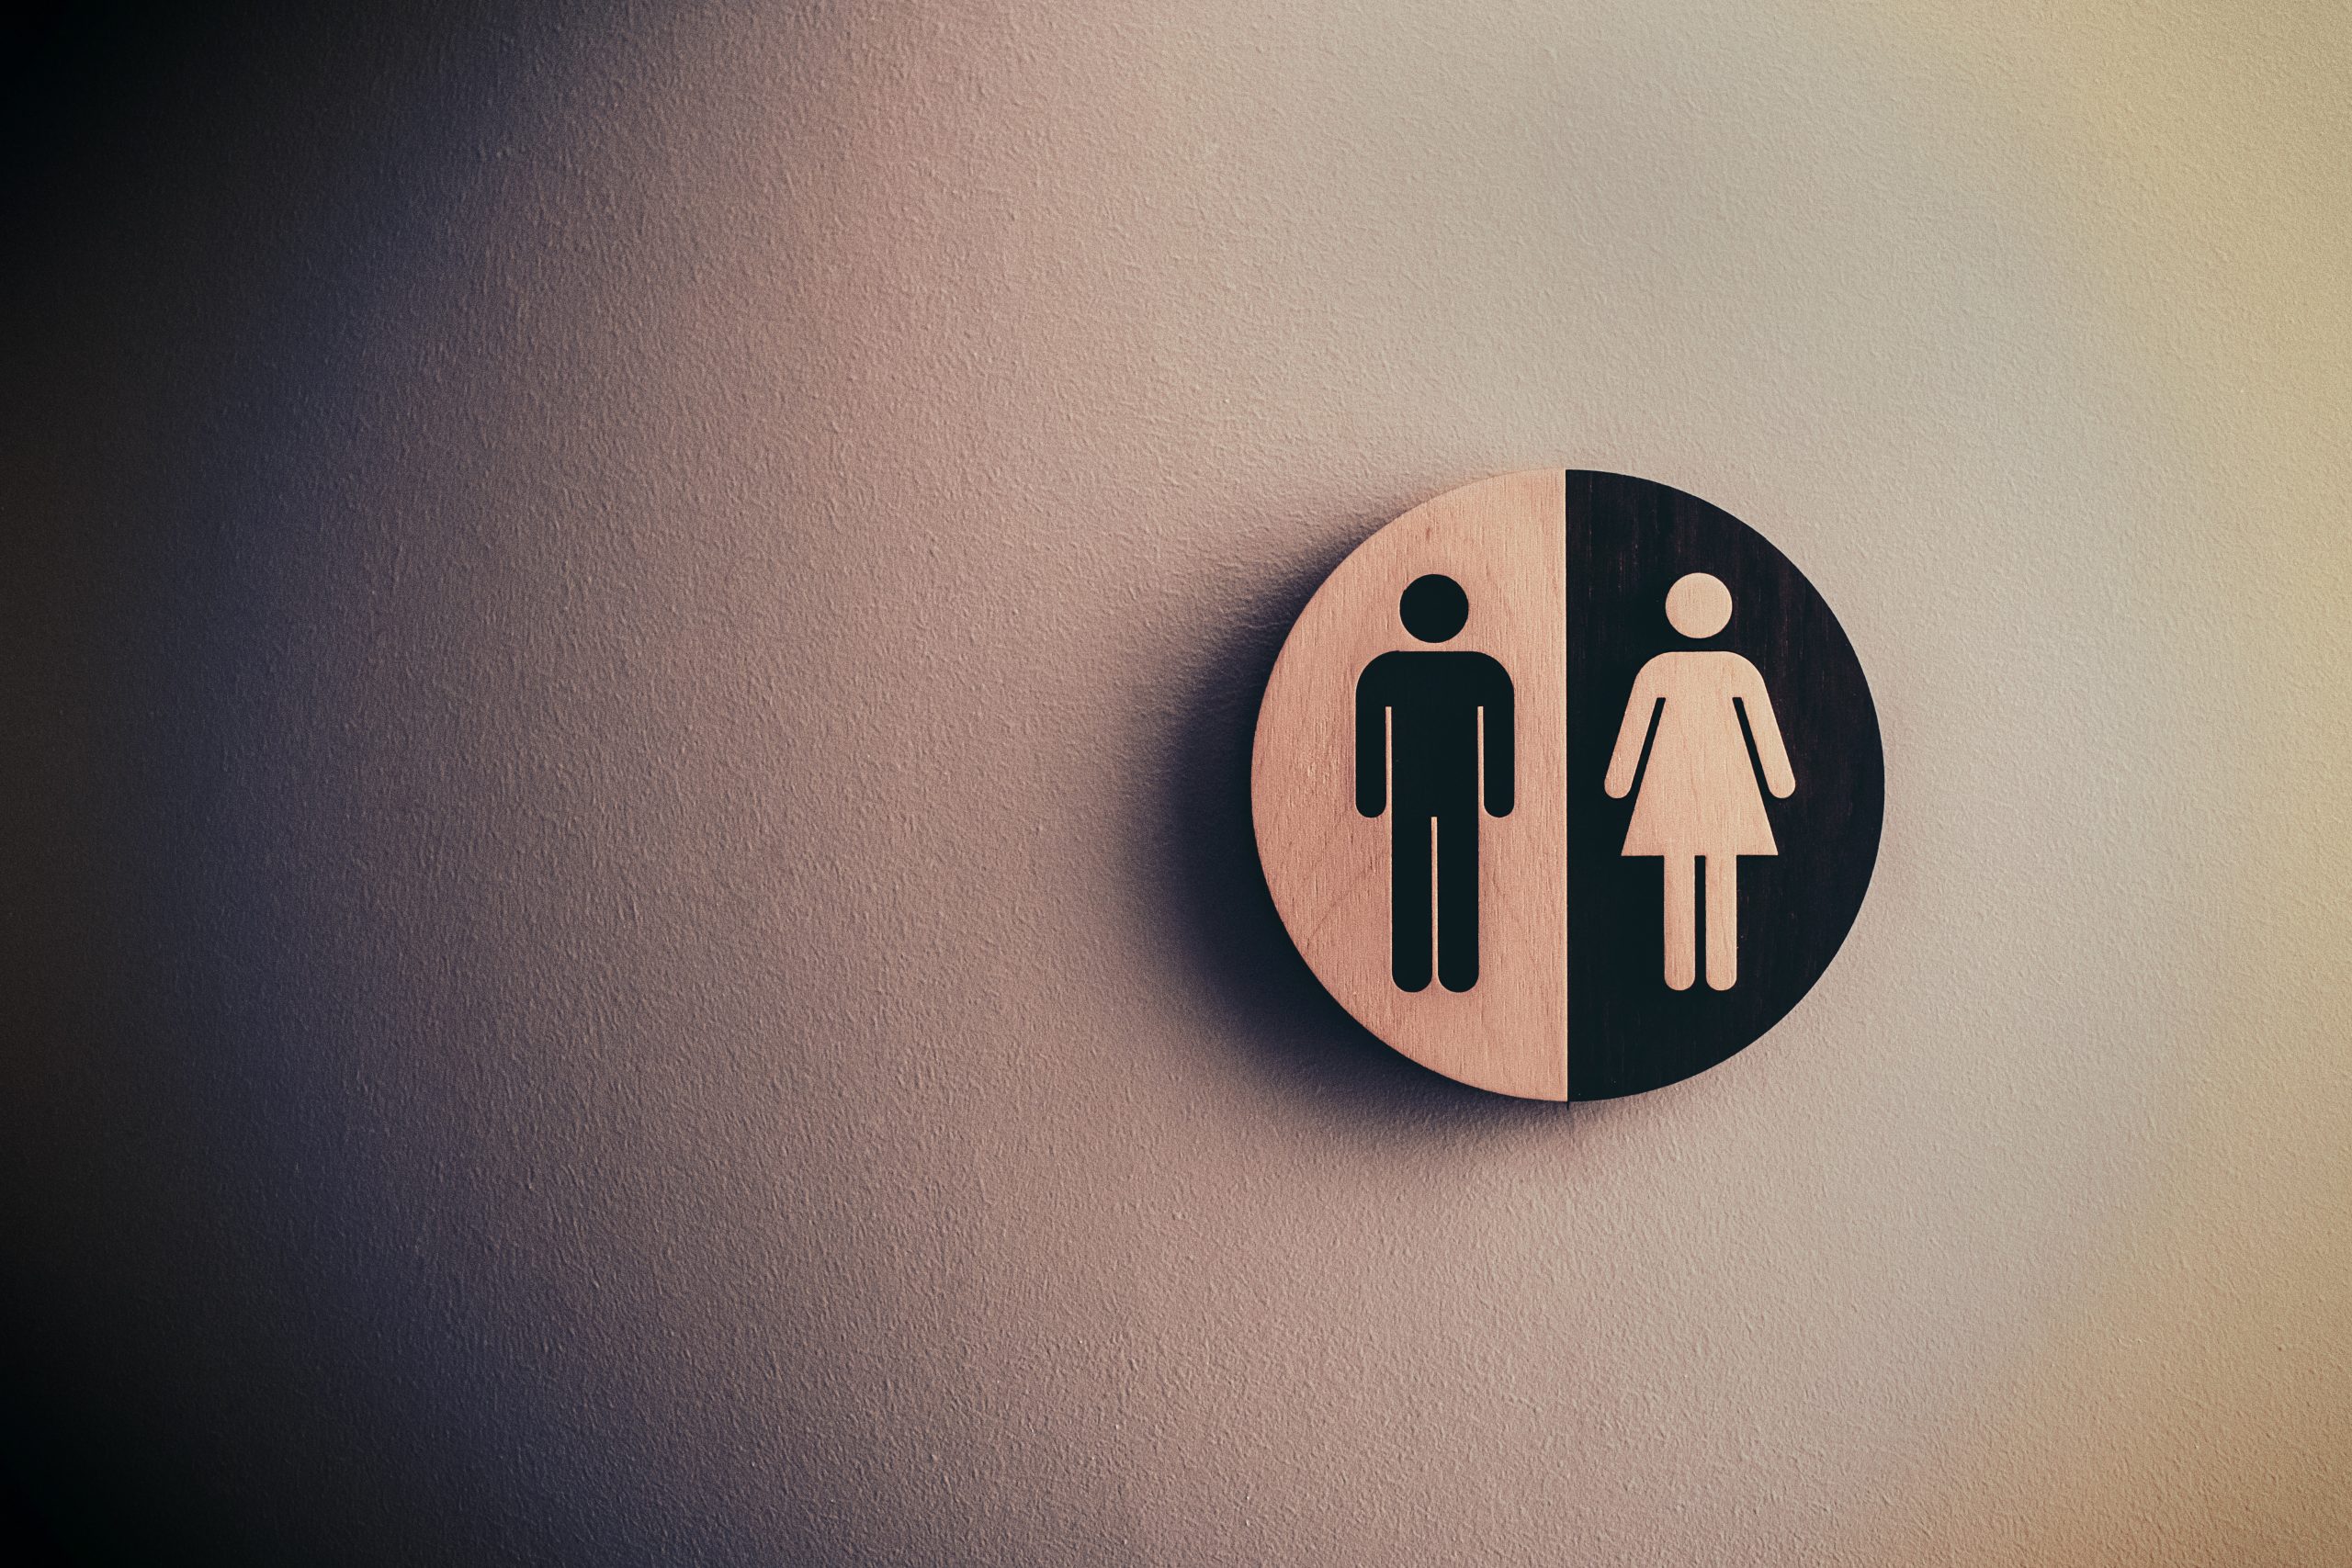 NEWS | All new public buildings should have separate male and female toilets, the Department for Levelling Up, Housing and Communities has announced